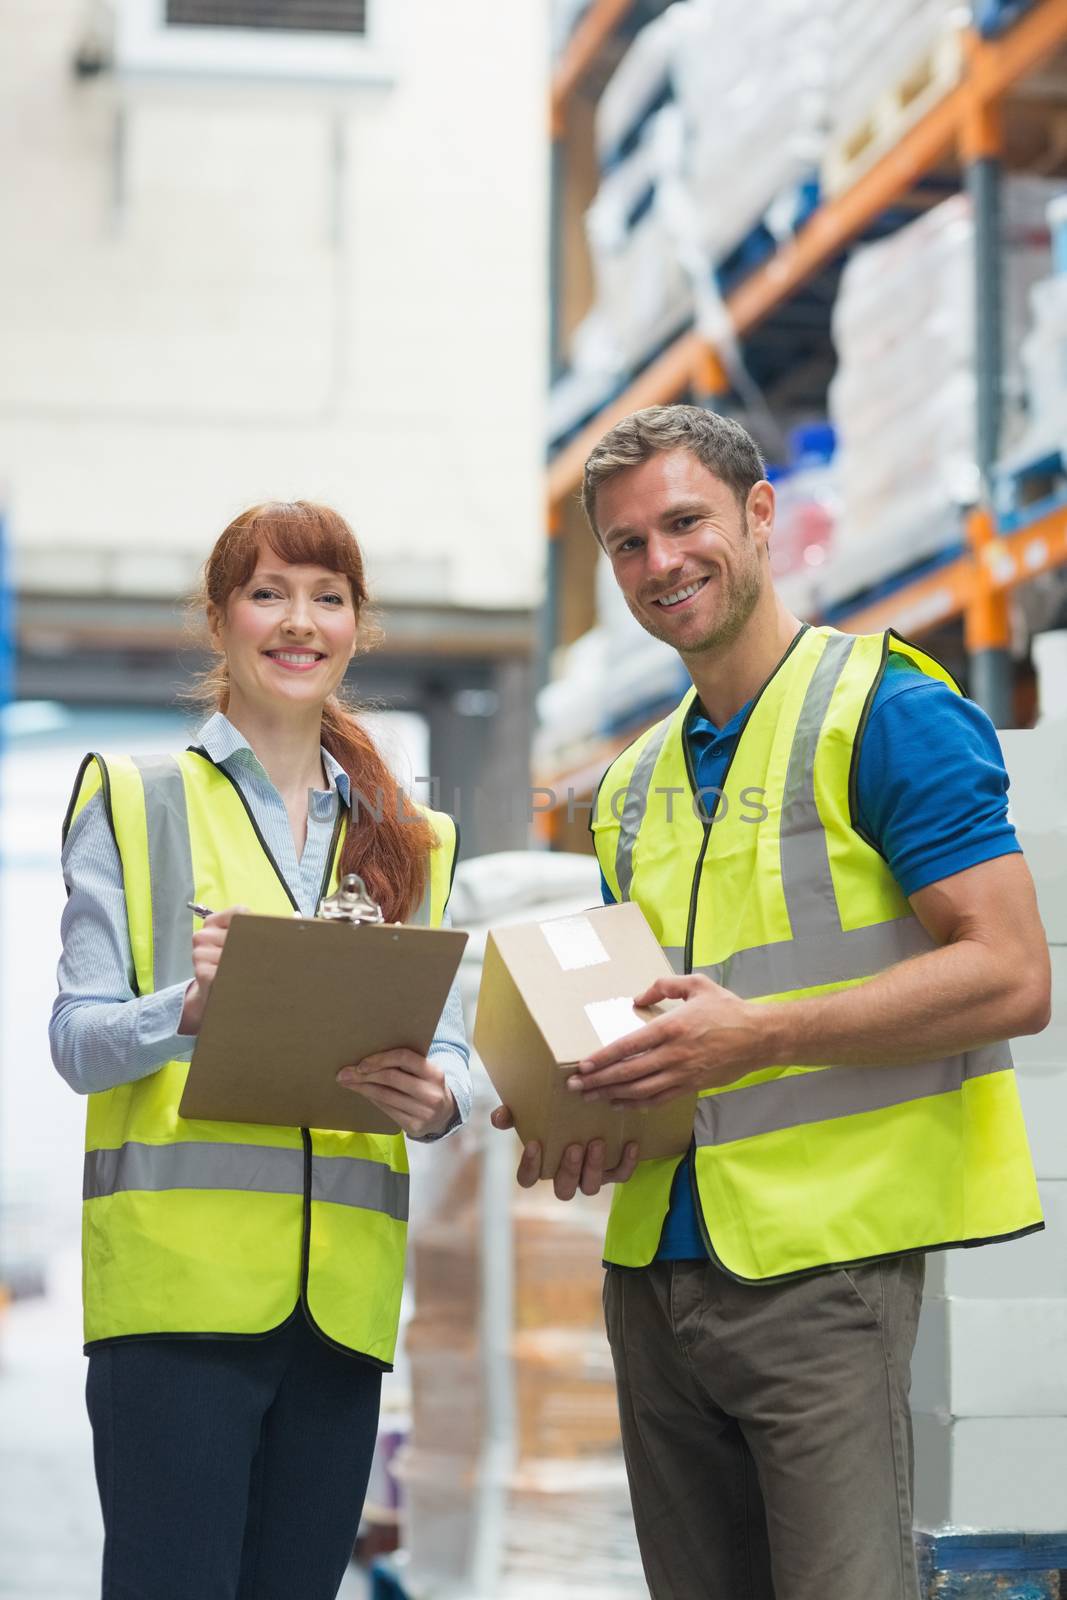 Smiling warehouse manager and delivery man by Wavebreakmedia